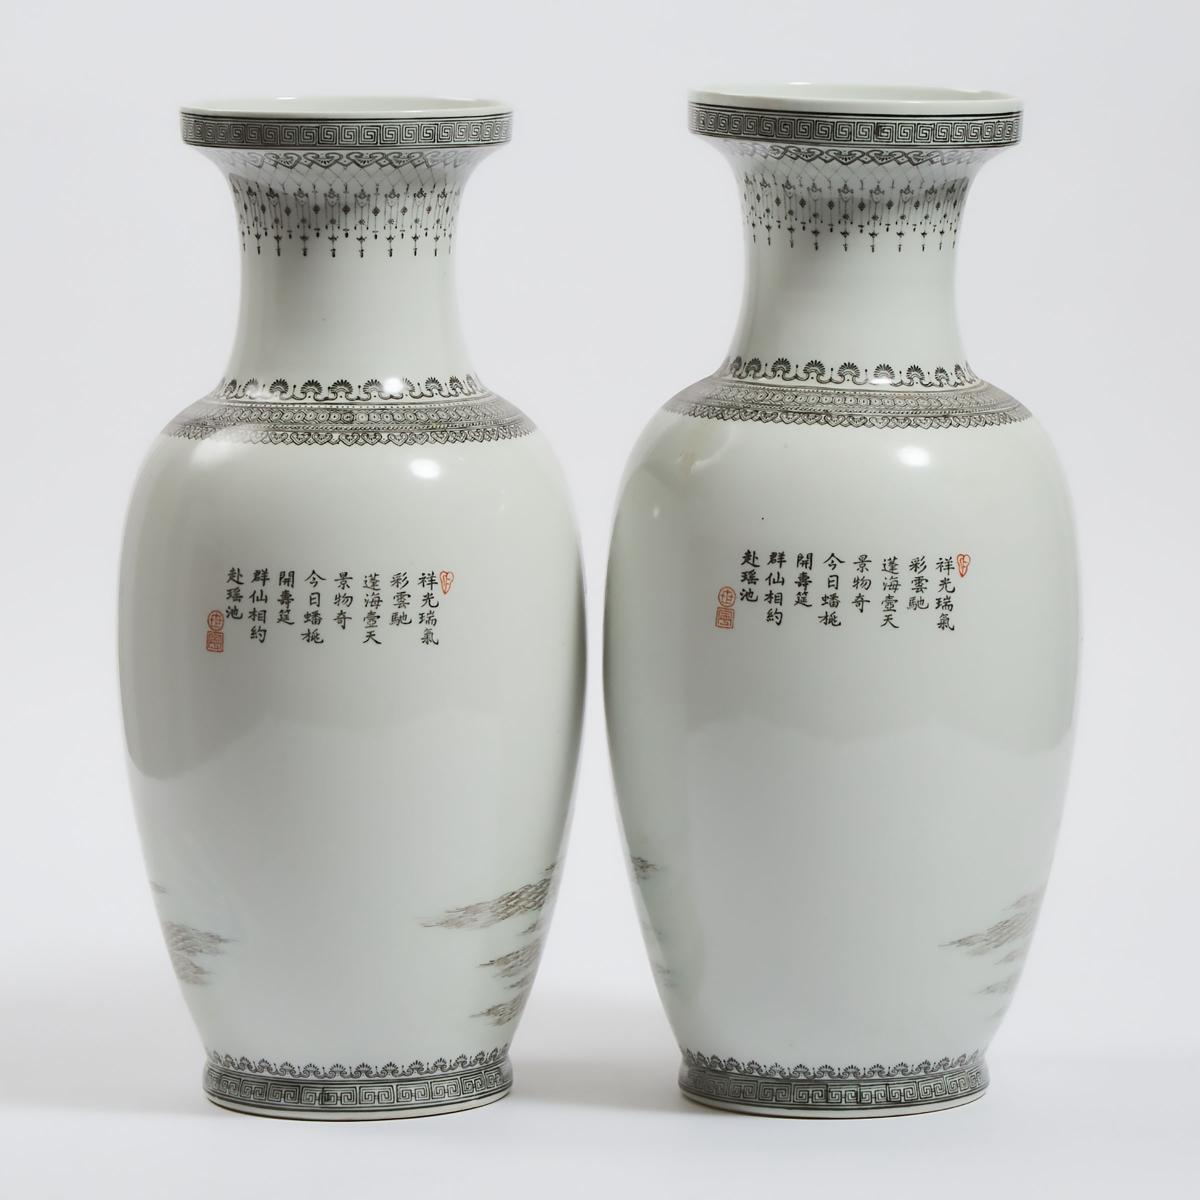 A Pair of Grisaille and Enamel Porcelain Vases, Mid 20th Century, 建国初期 粉彩'祥光瑞气'诗文八仙人物瓶一对, height 18. - Image 2 of 3